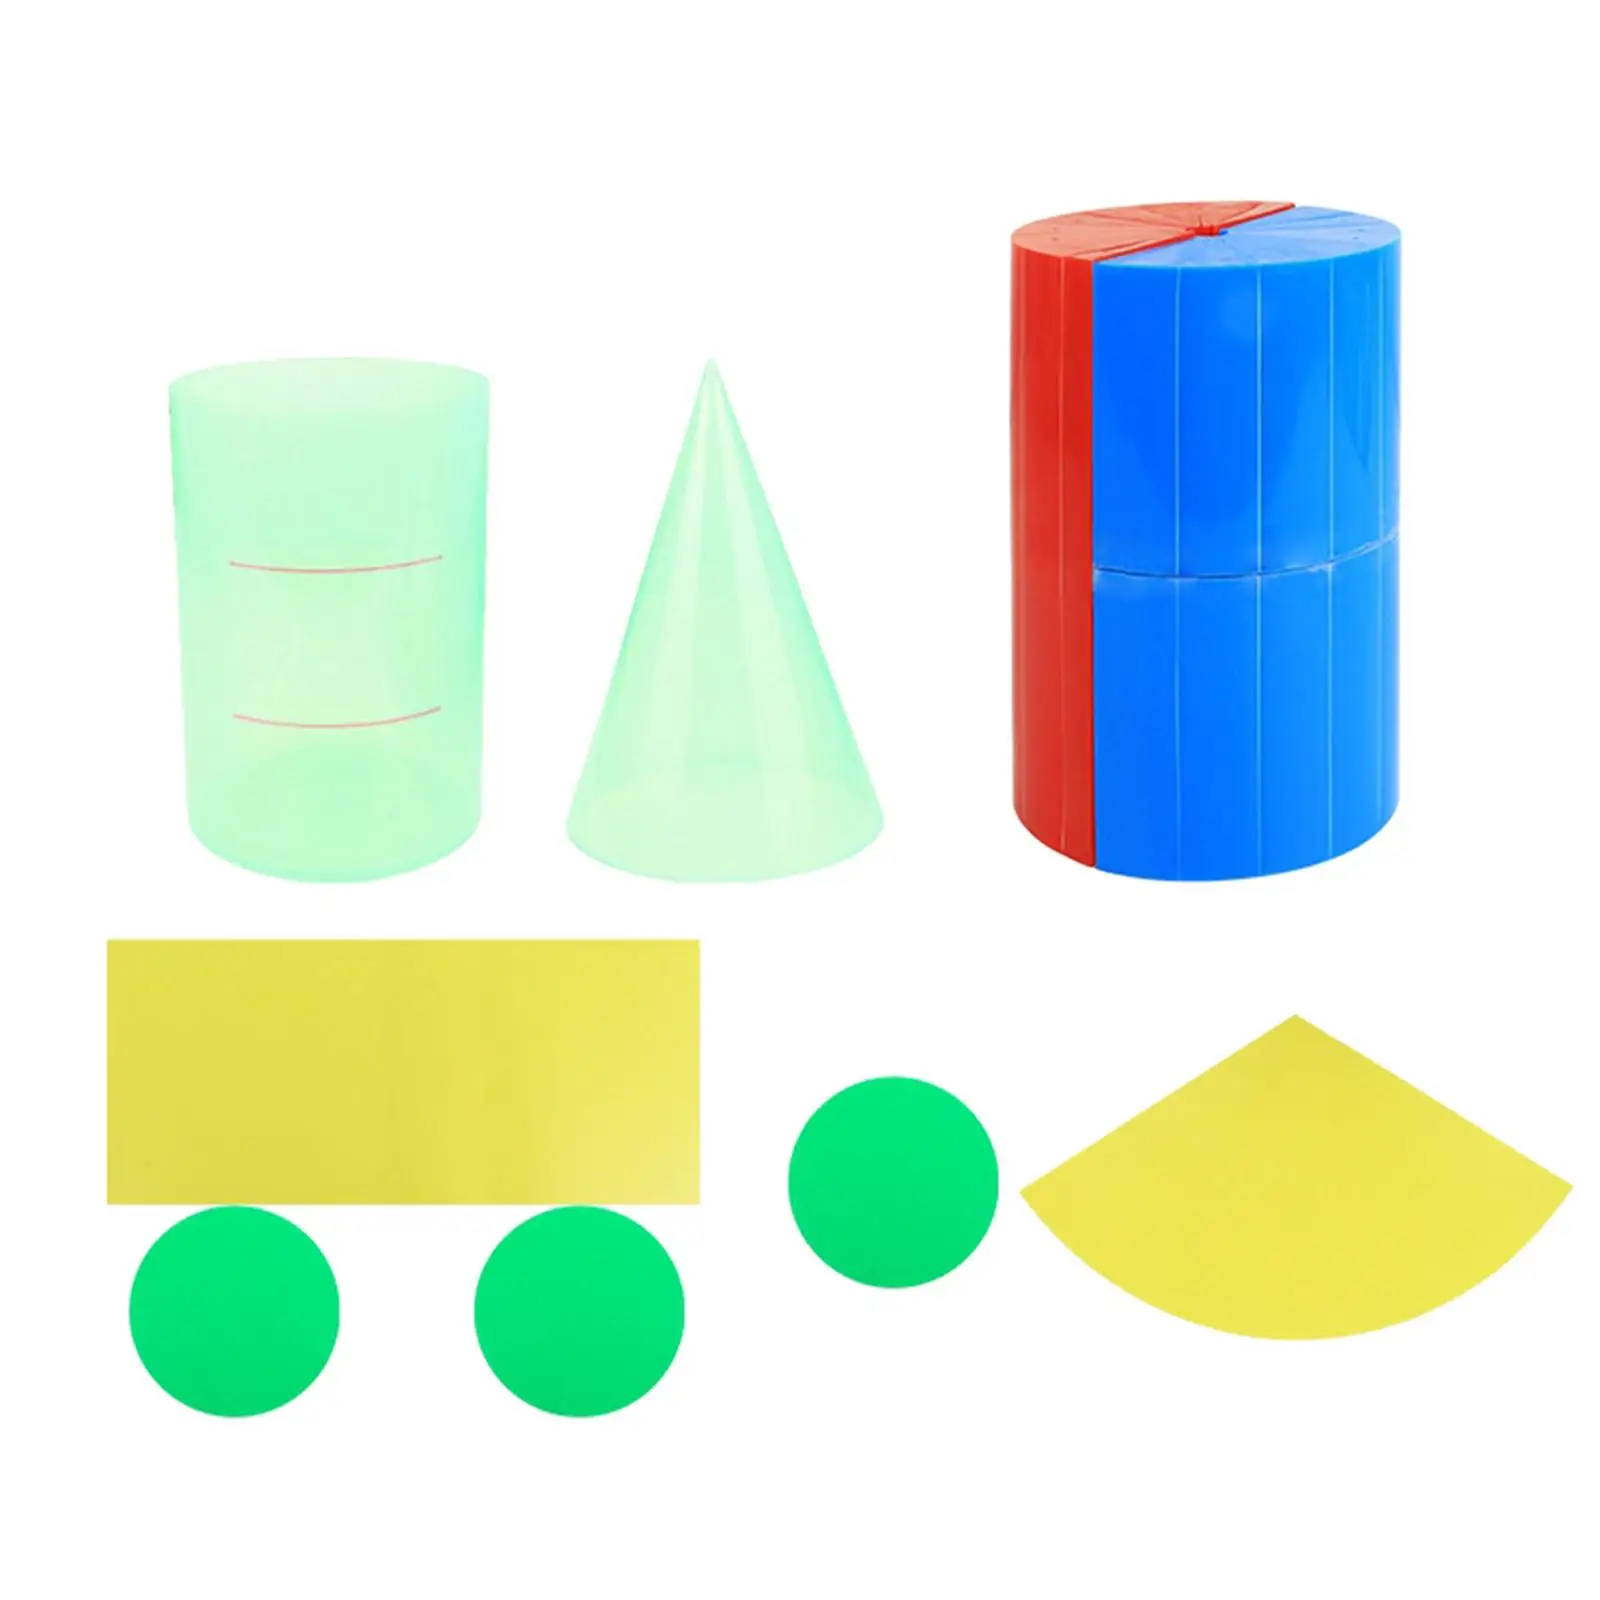 3D Shapes Geometric Teaching Material Surface Area Math Toys for Children